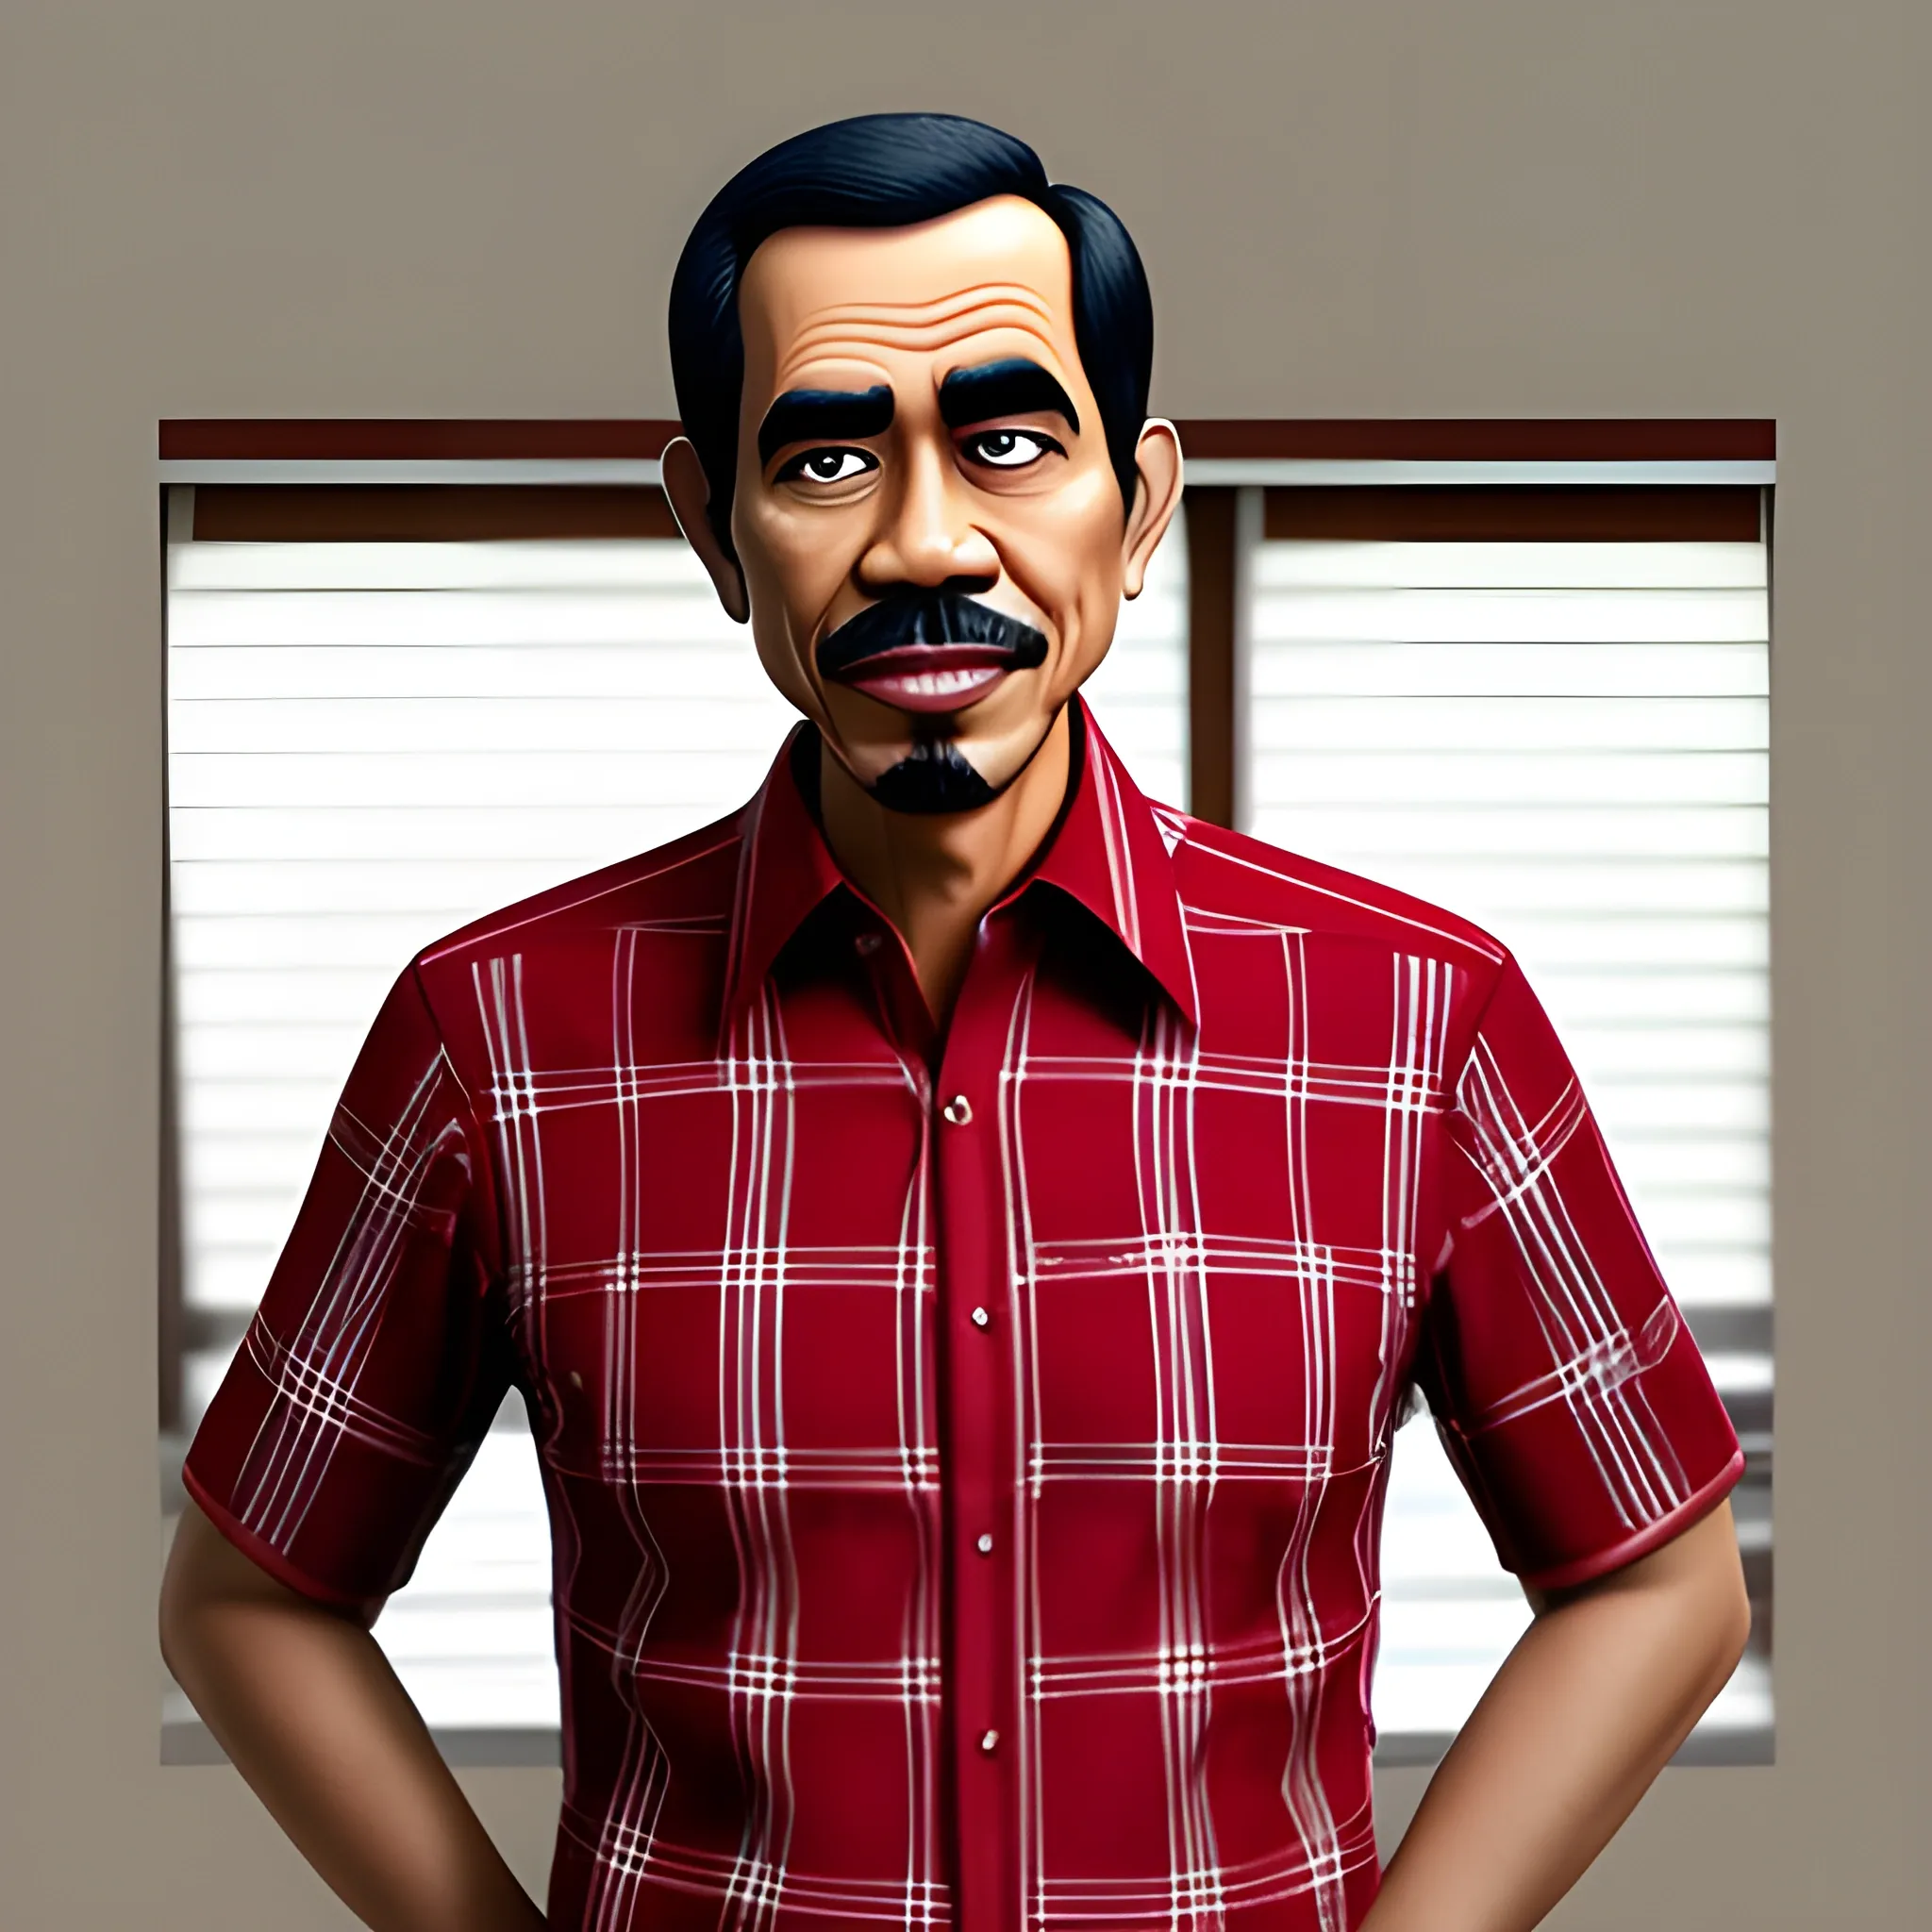 "A child-faced man with the face of Jokowi, wearing a red and white checkered shirt, a white hat, and brown boots, looking at the camera, in Pixar style -- AR 9:16"